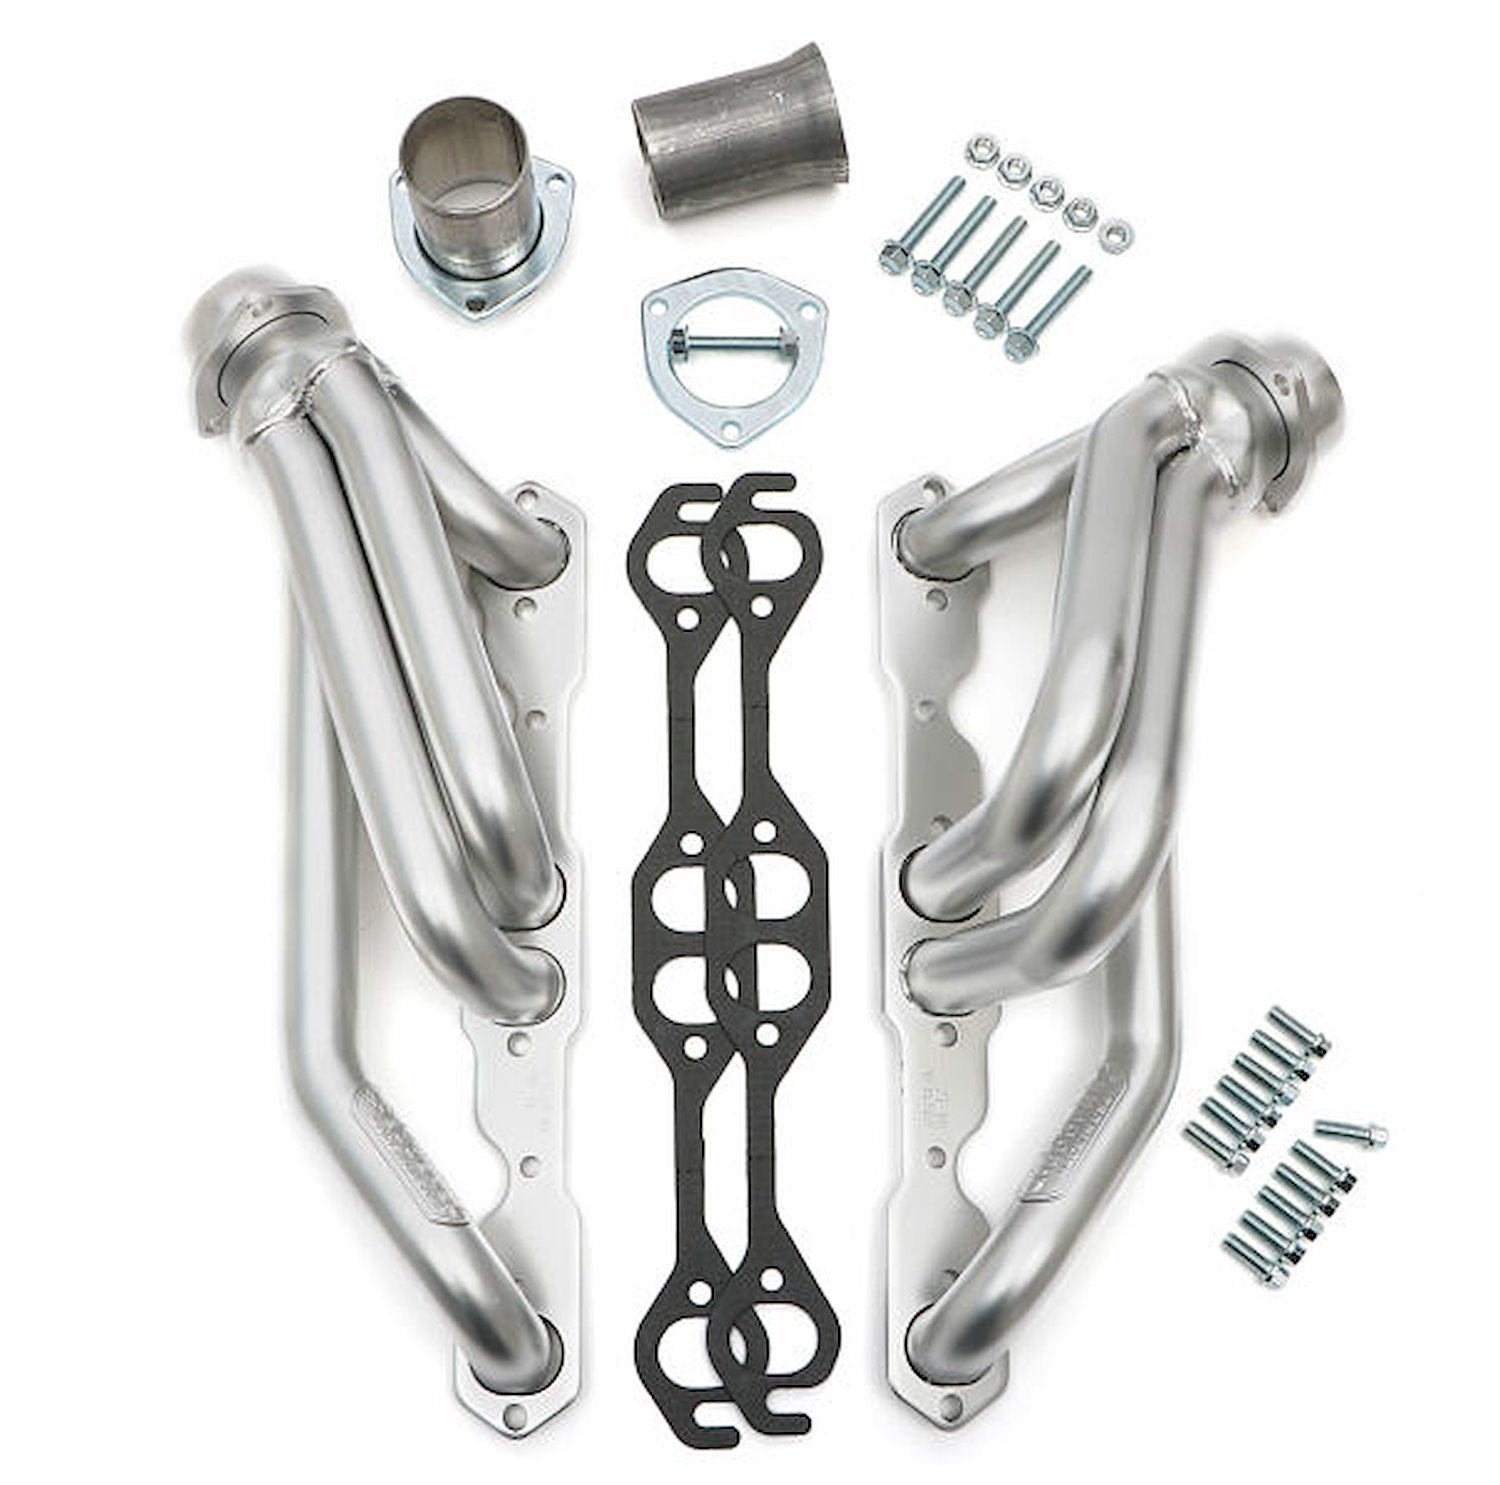 S10 Engine Swap Headers 1982-2000 Chevy S10 with